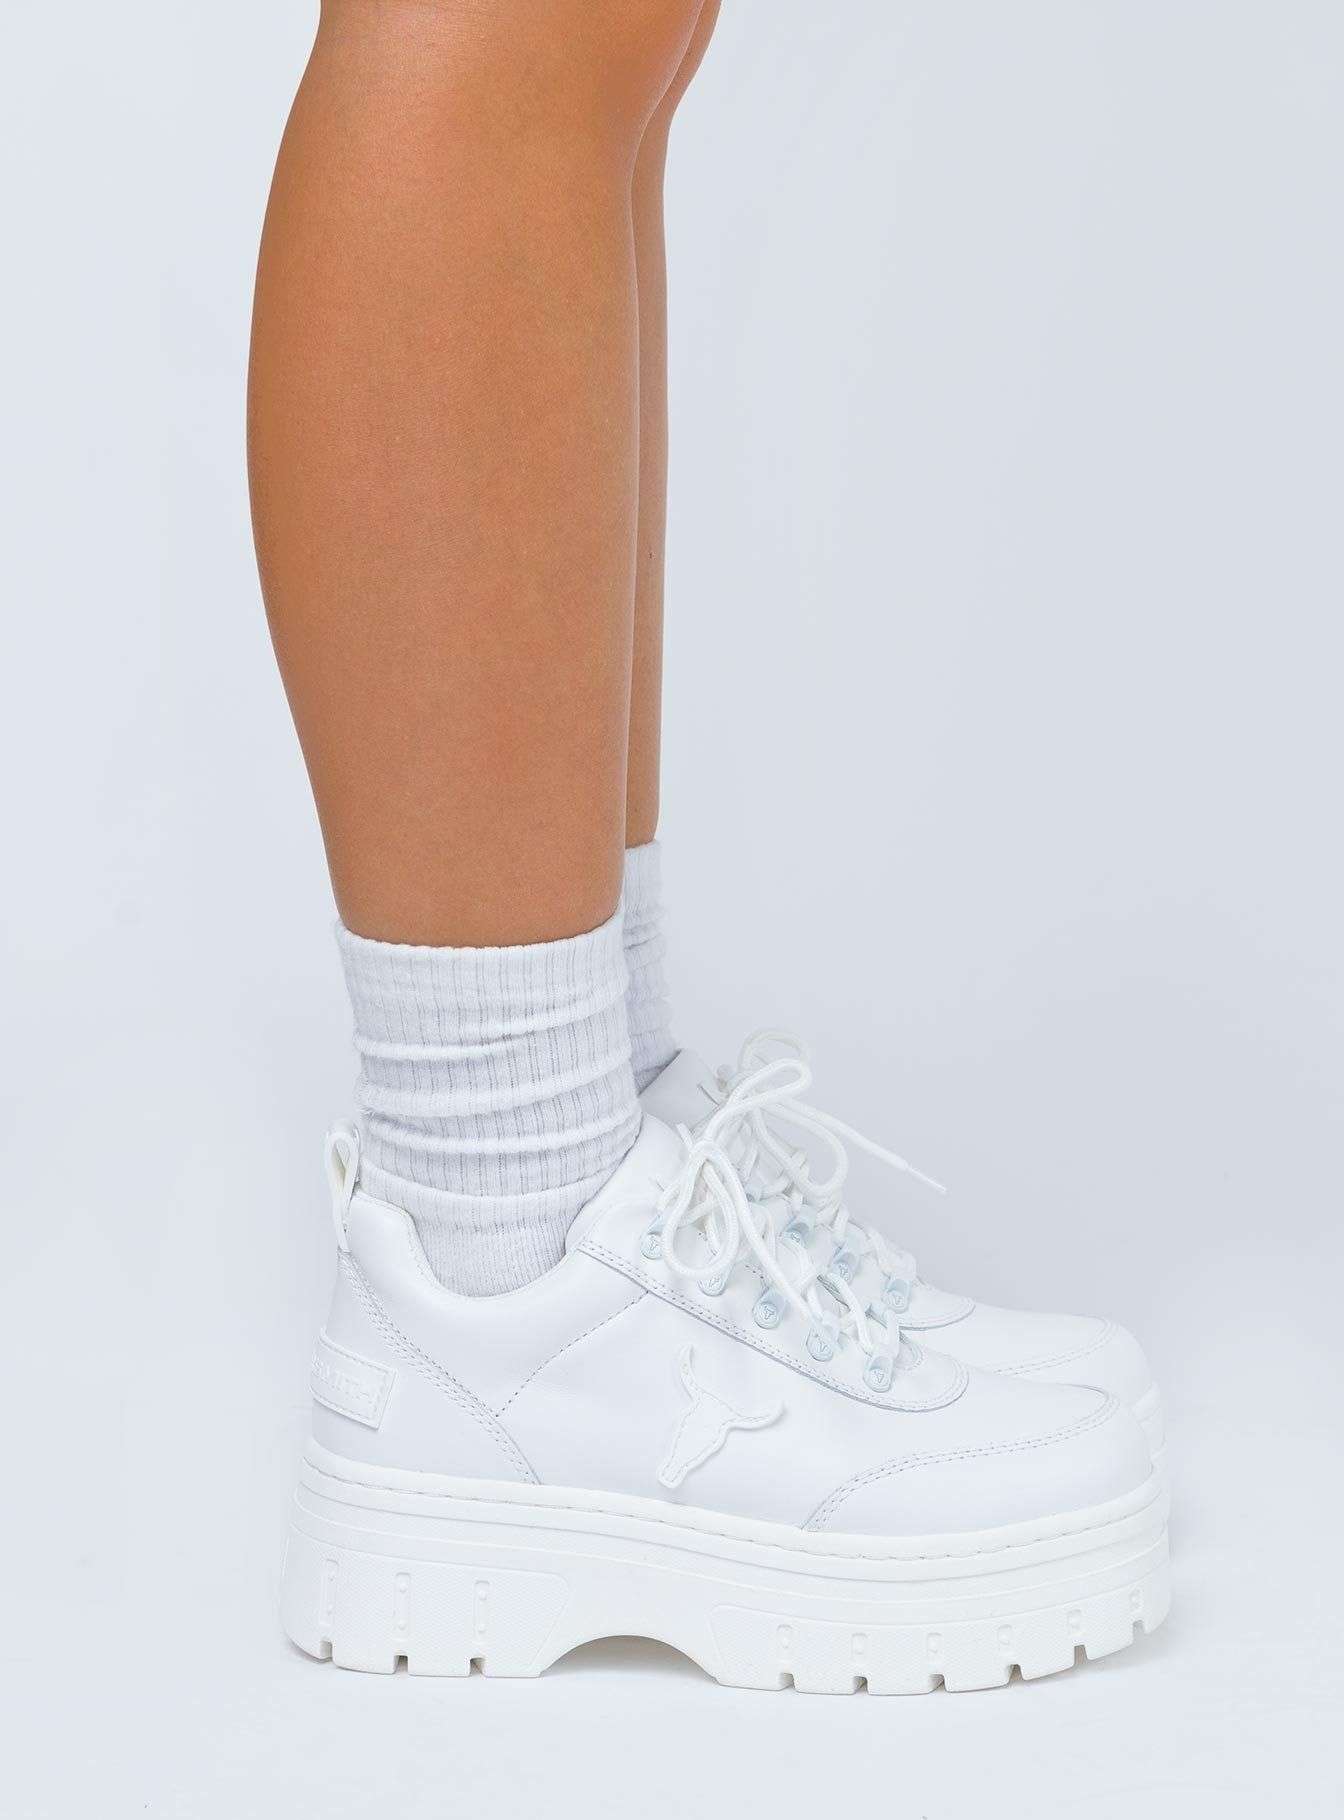 Windsor Smith Lux Sneakers White in 2021